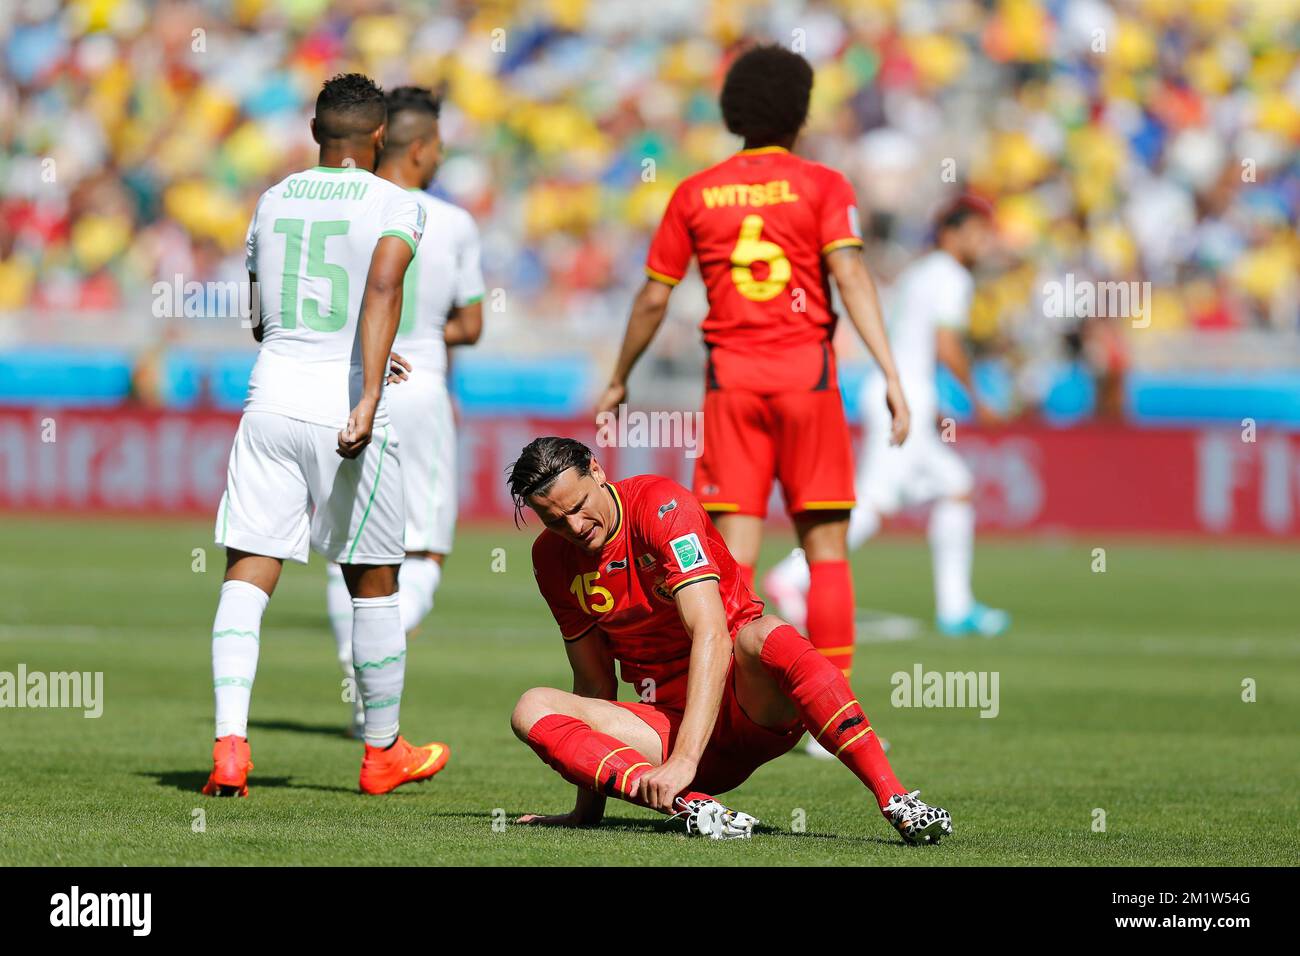 Belgium's Daniel Van Buyten pictured during a soccer game between Belgian national team The Red Devils and Algeria in Belo Horizonte, Brazil, the first game in Group H of the first round of the 2014 FIFA World Cup, Tuesday 17 June 2014. Stock Photo